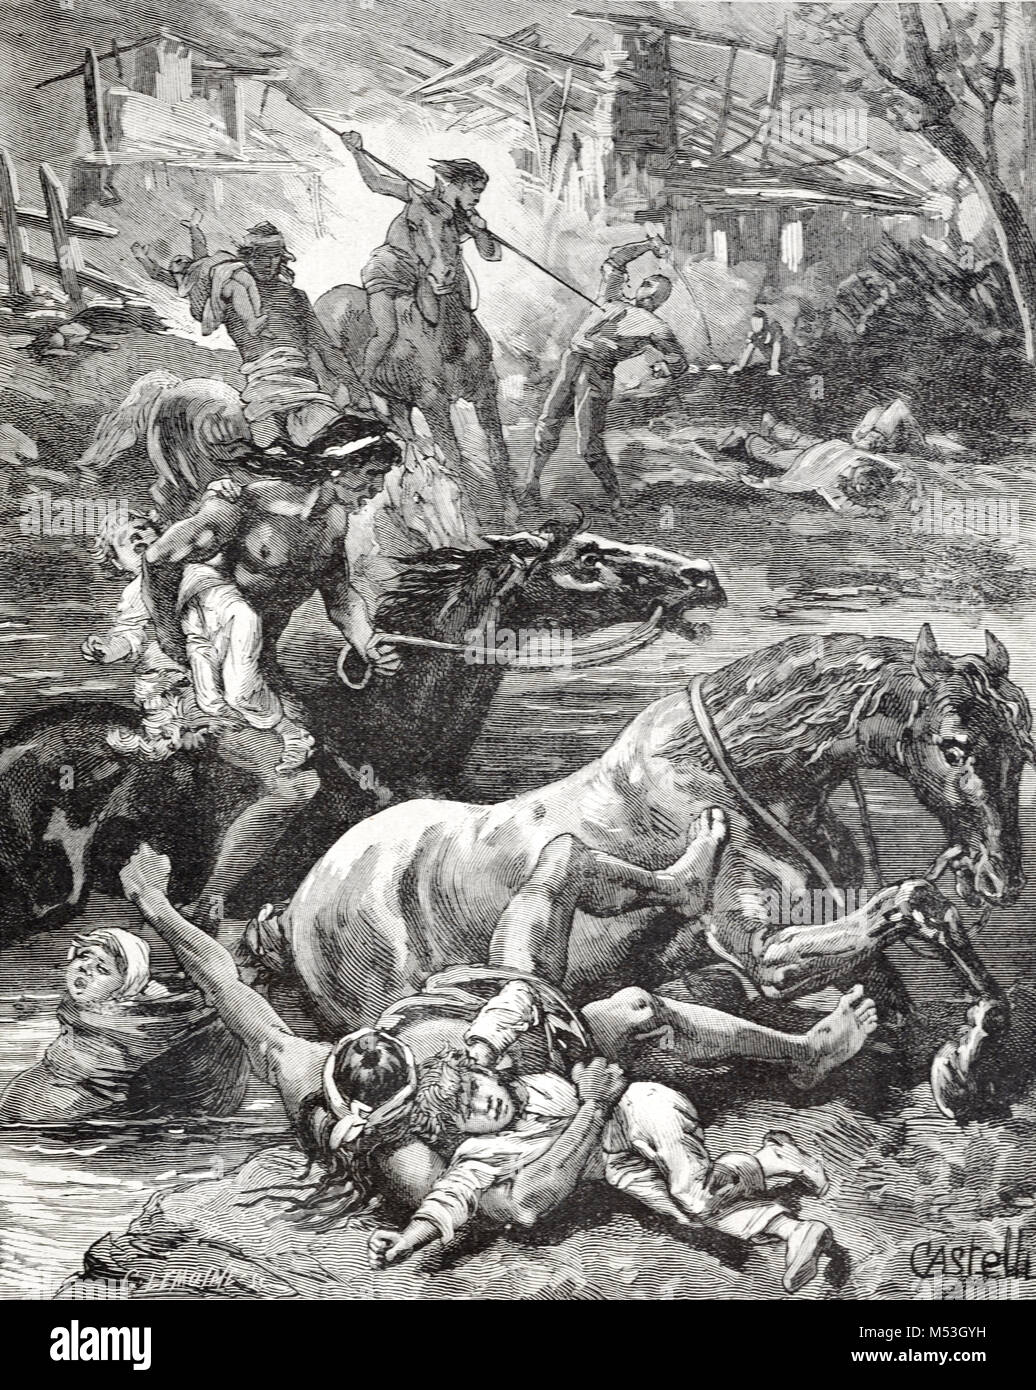 Conflict Between European Colonialists or Settlers and Native American Indians in Brazil. Indigenous Brazilians Attack a Settlers Camp and Seize their Children (Engraving, 1888) Stock Photo